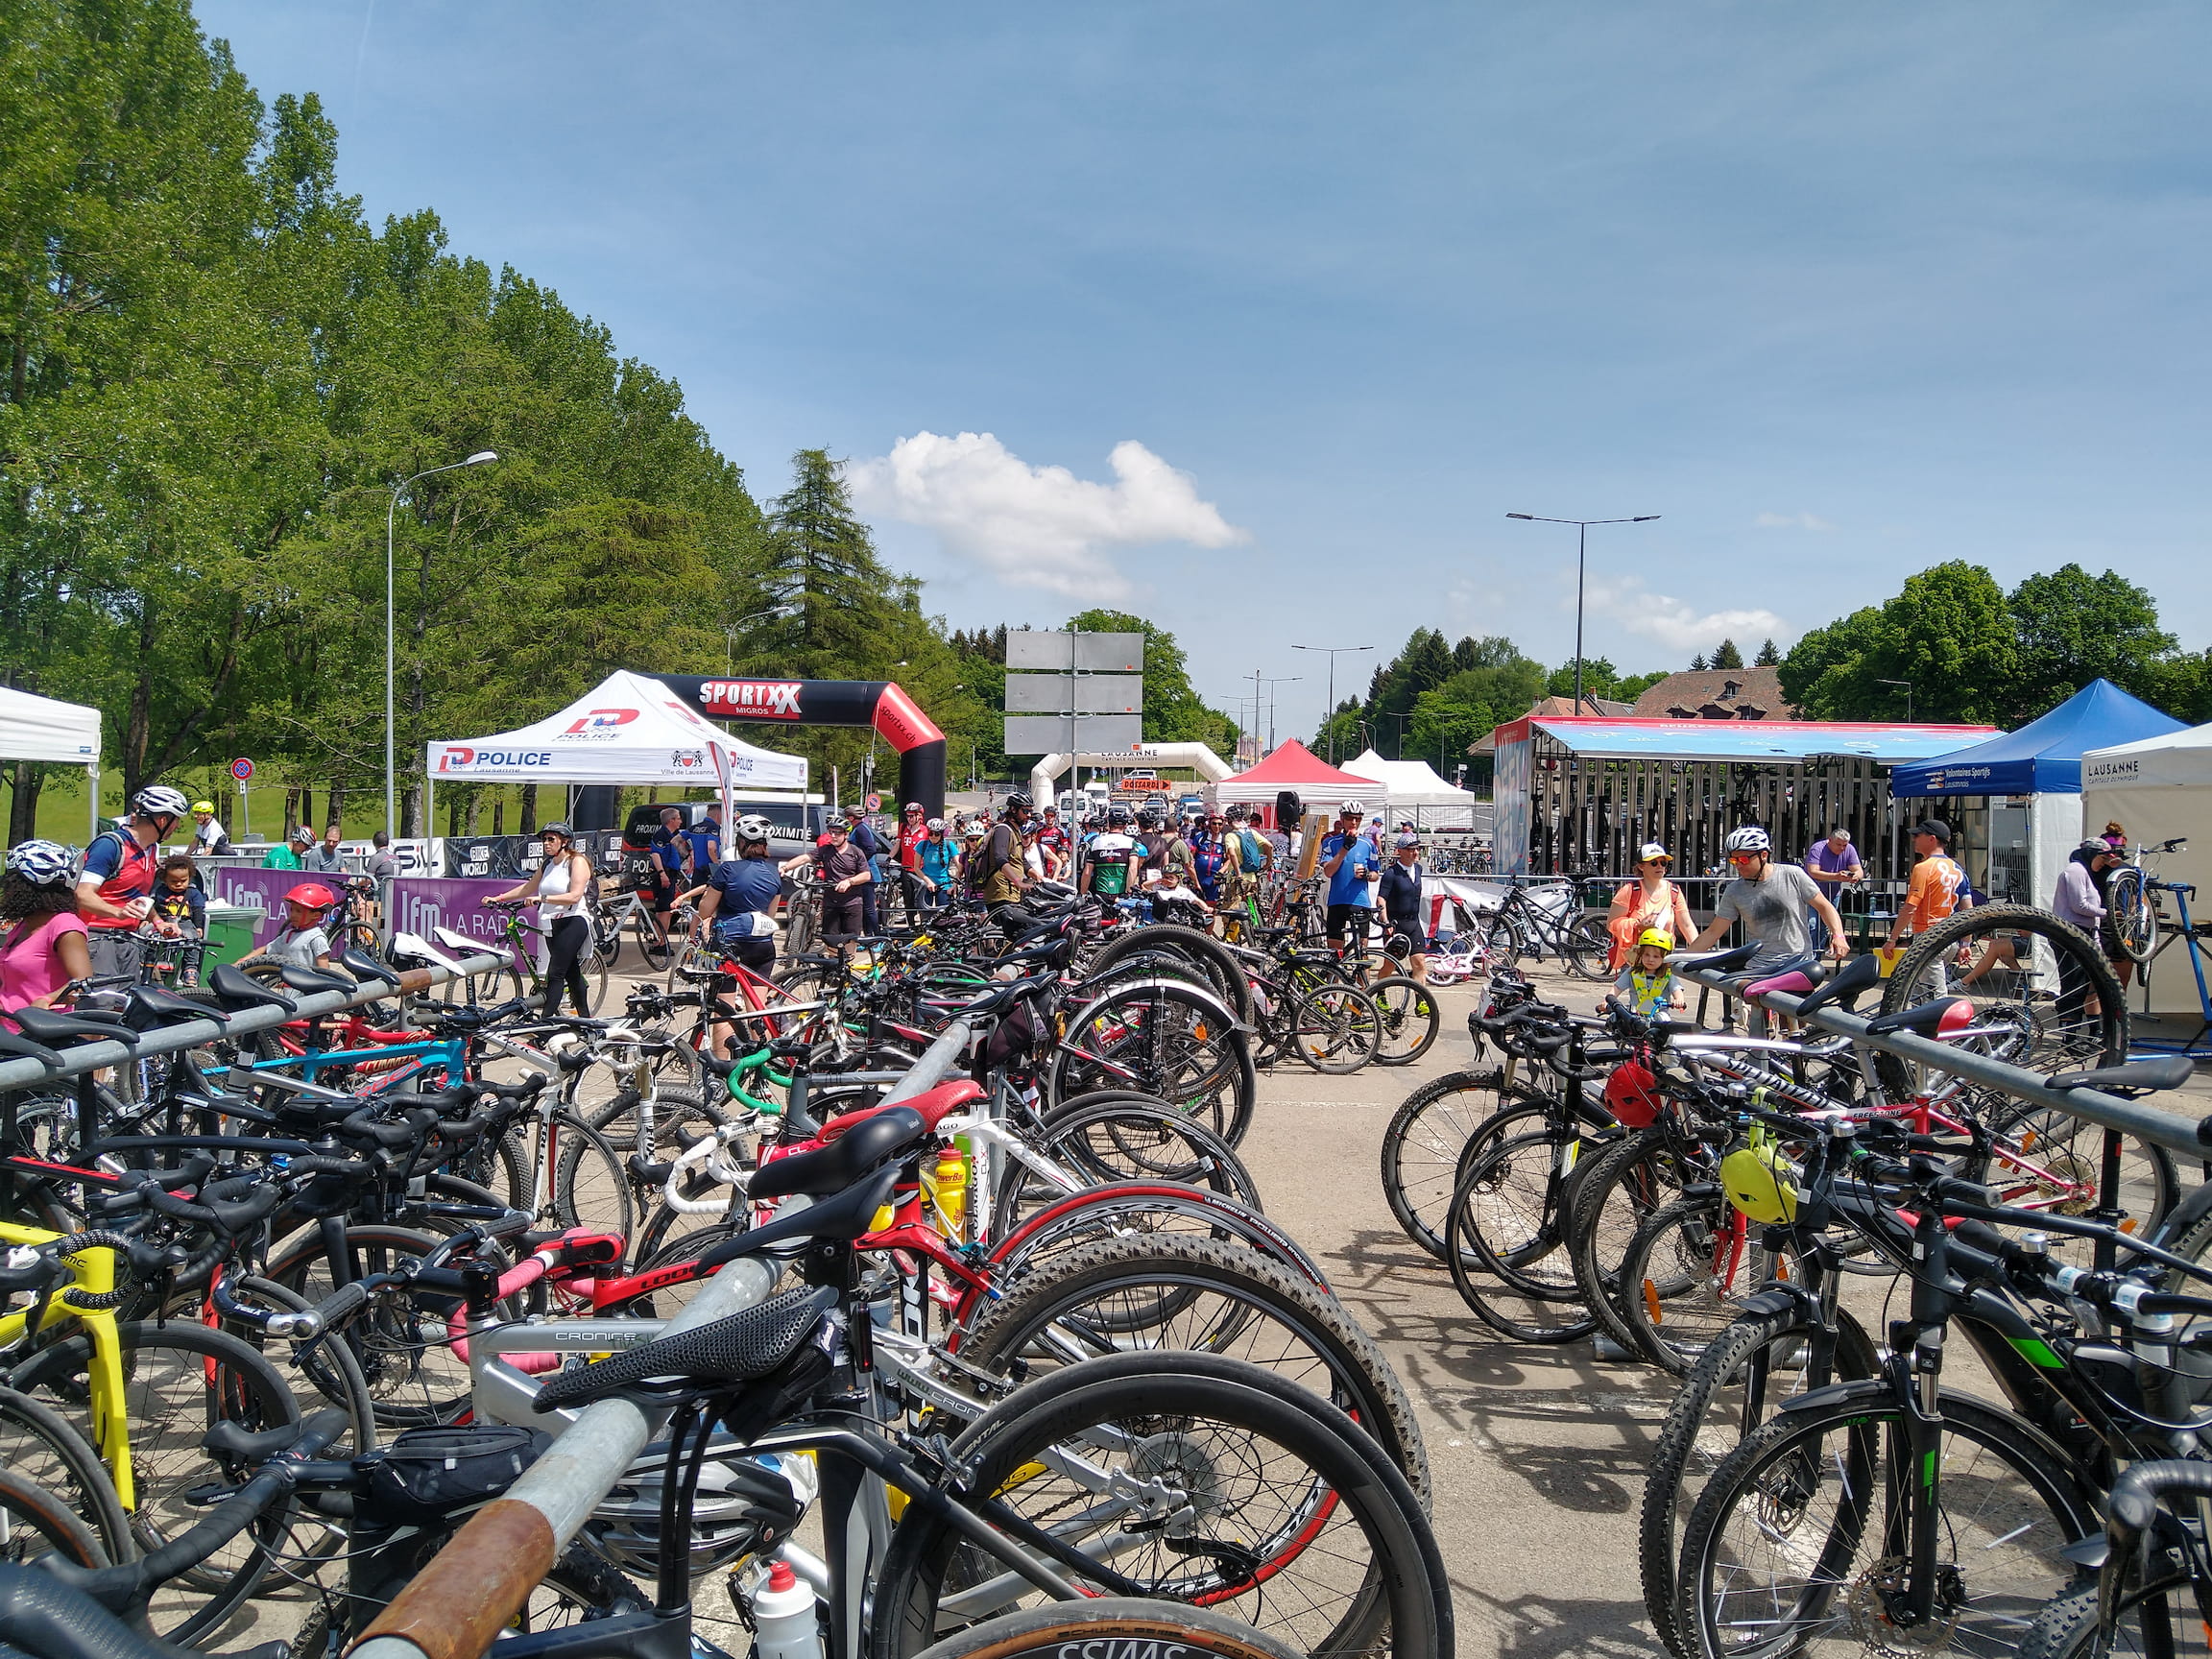 The bicycle parking is surrounded by booths offering food, beverages and massages